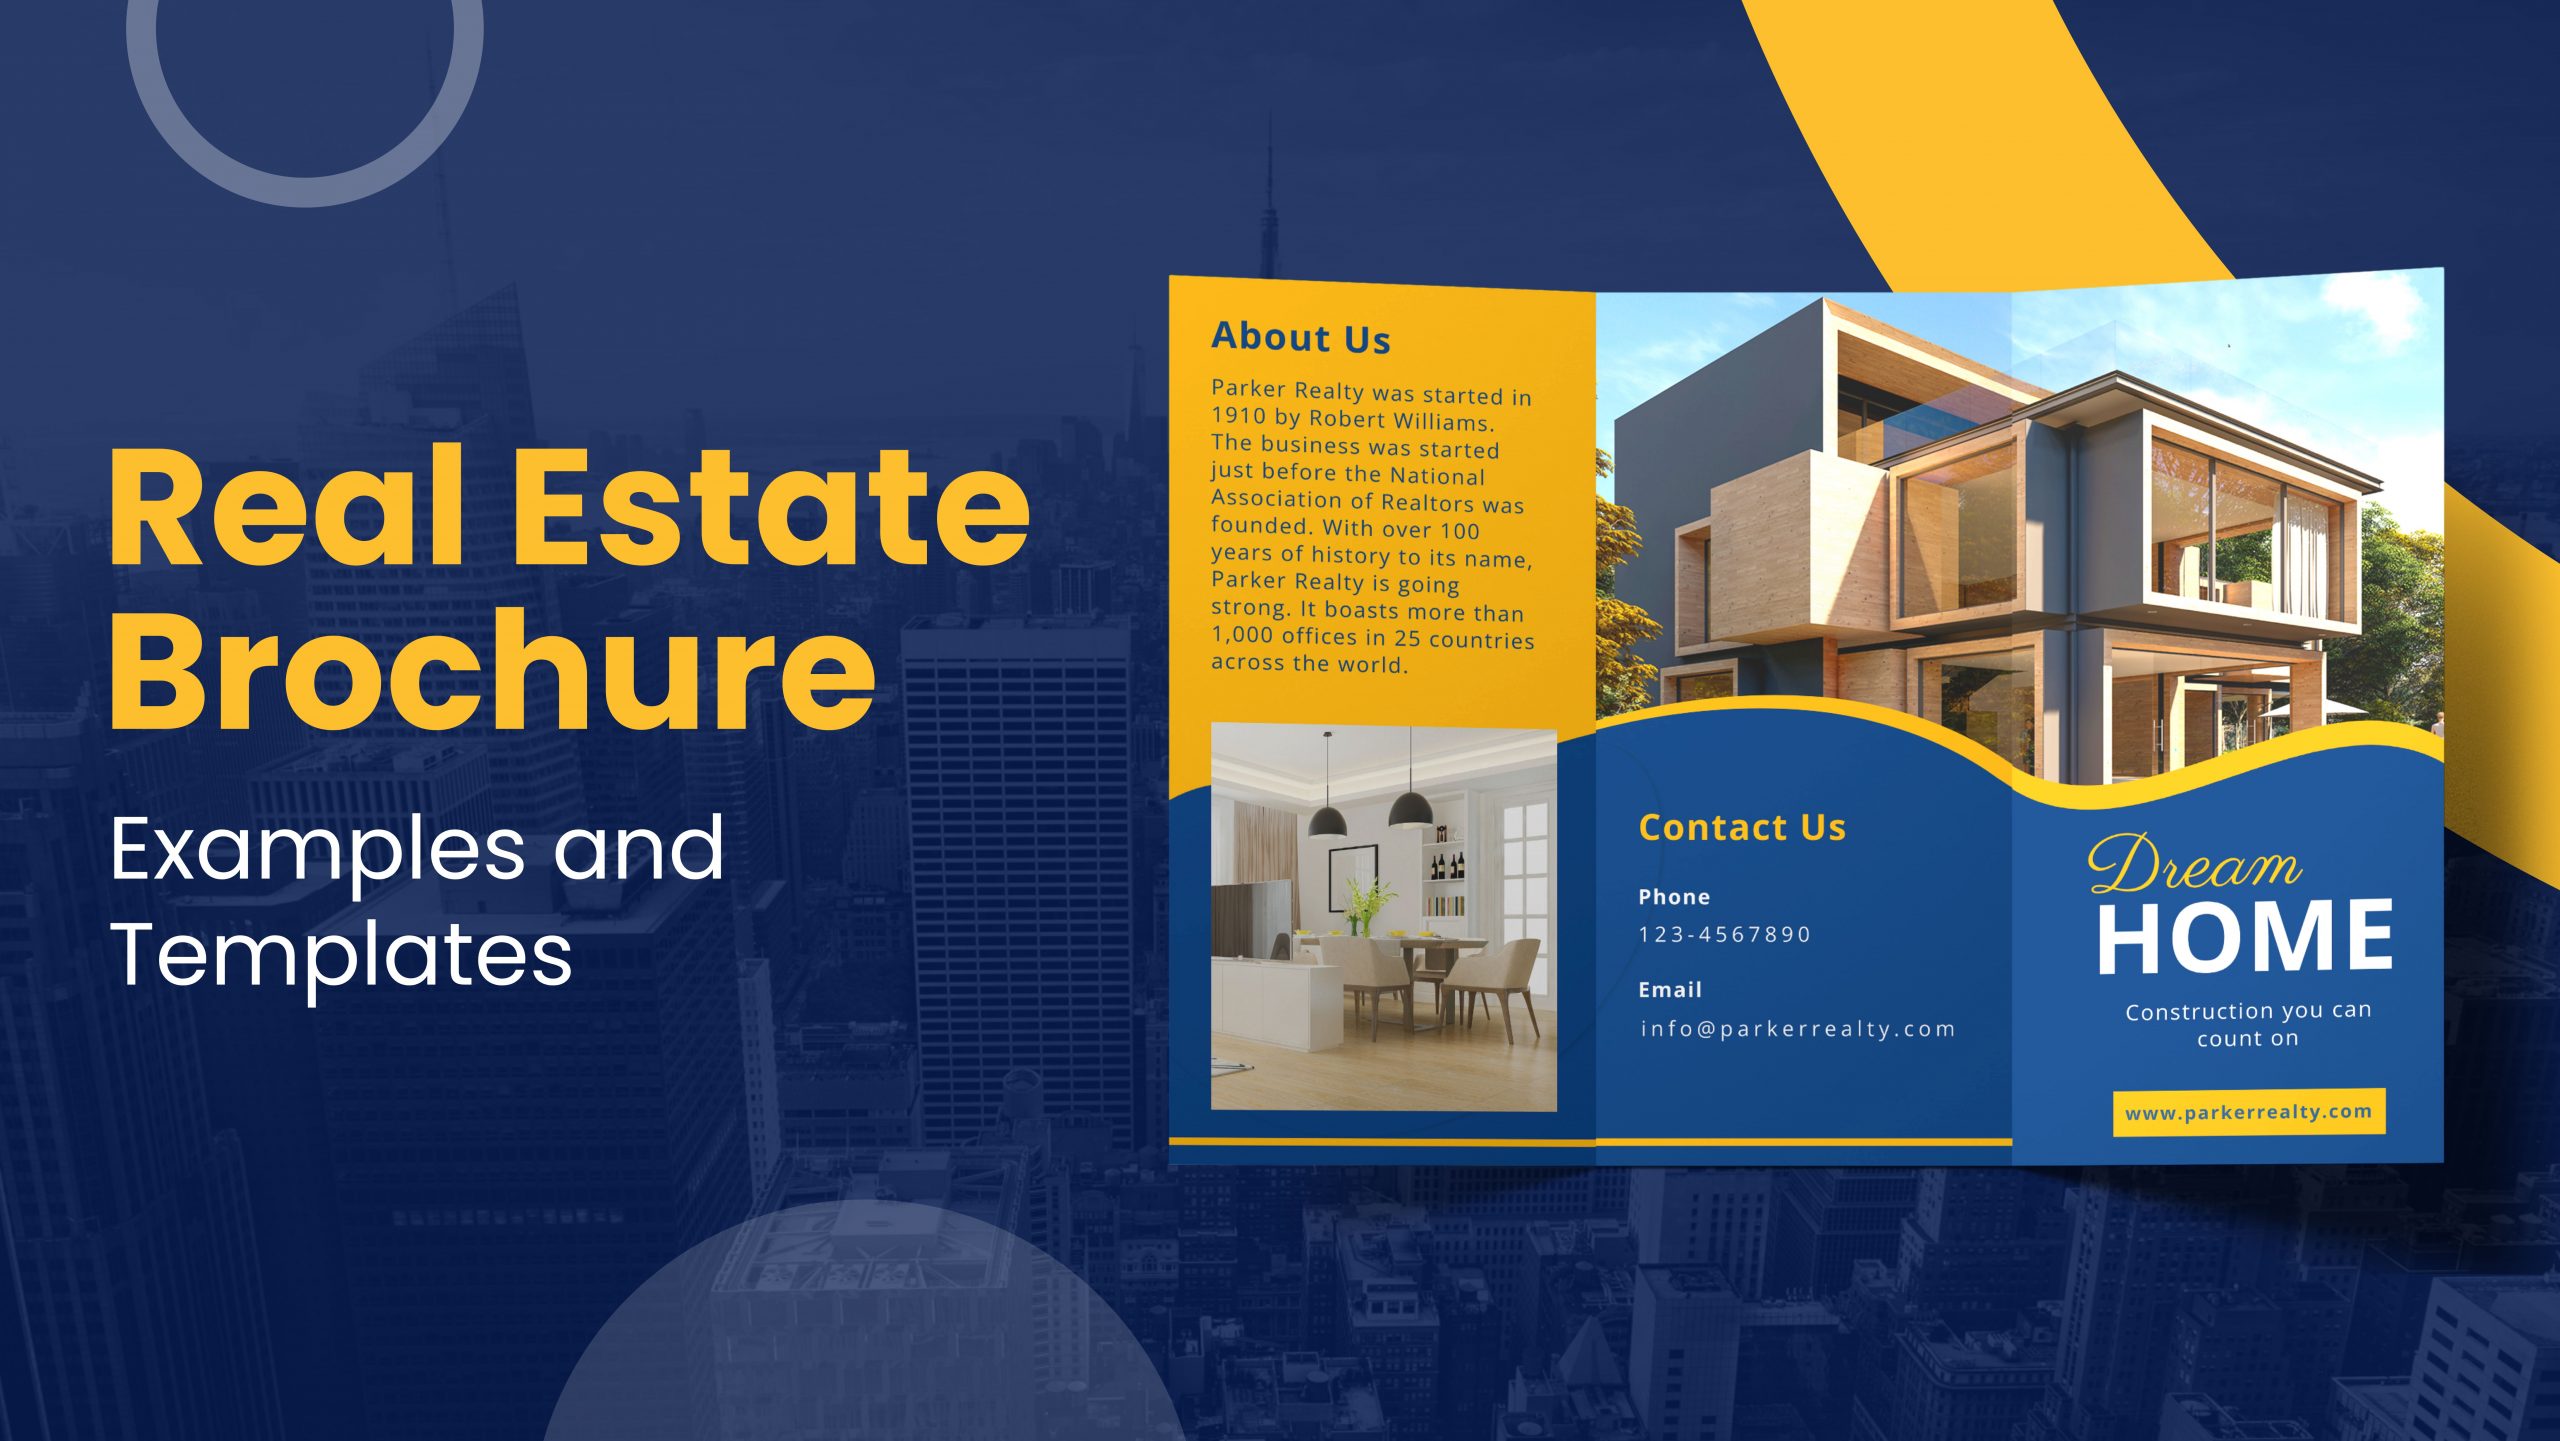 Real Estate Brochure Examples and Templates